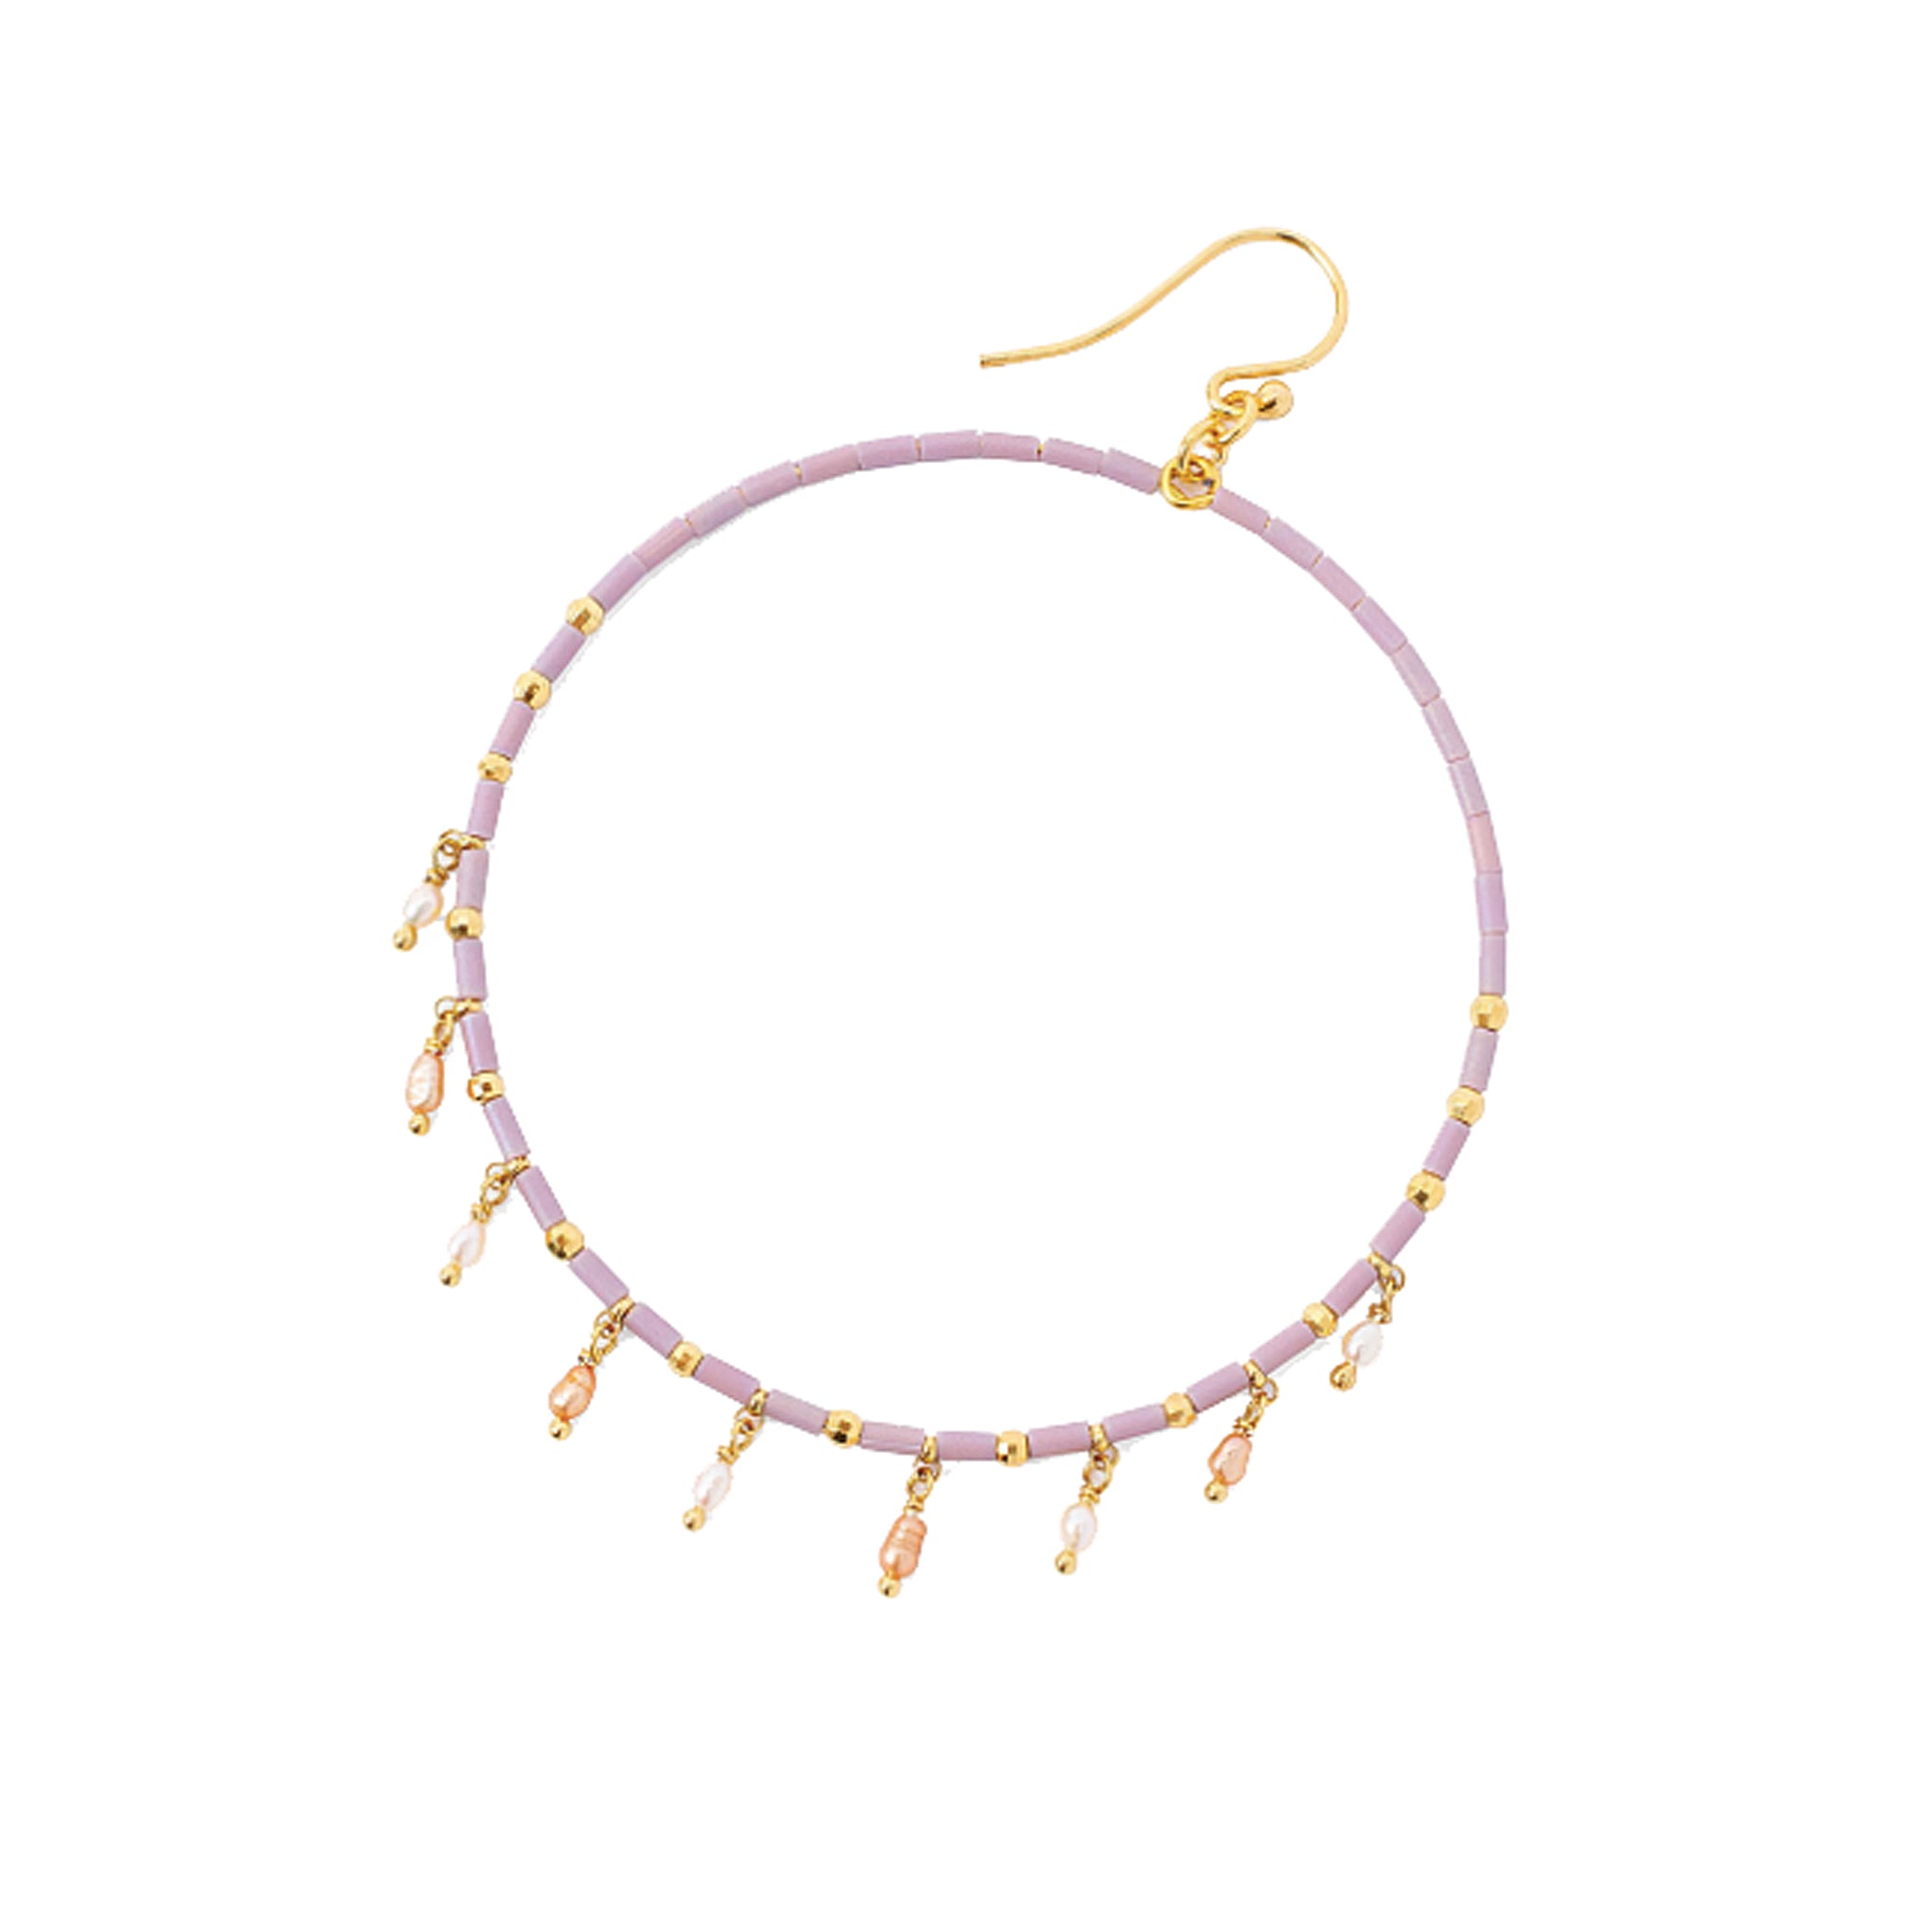 Chan Luu Gold Hoop Earrings in Mauve Seed Beads with Pearl Charms